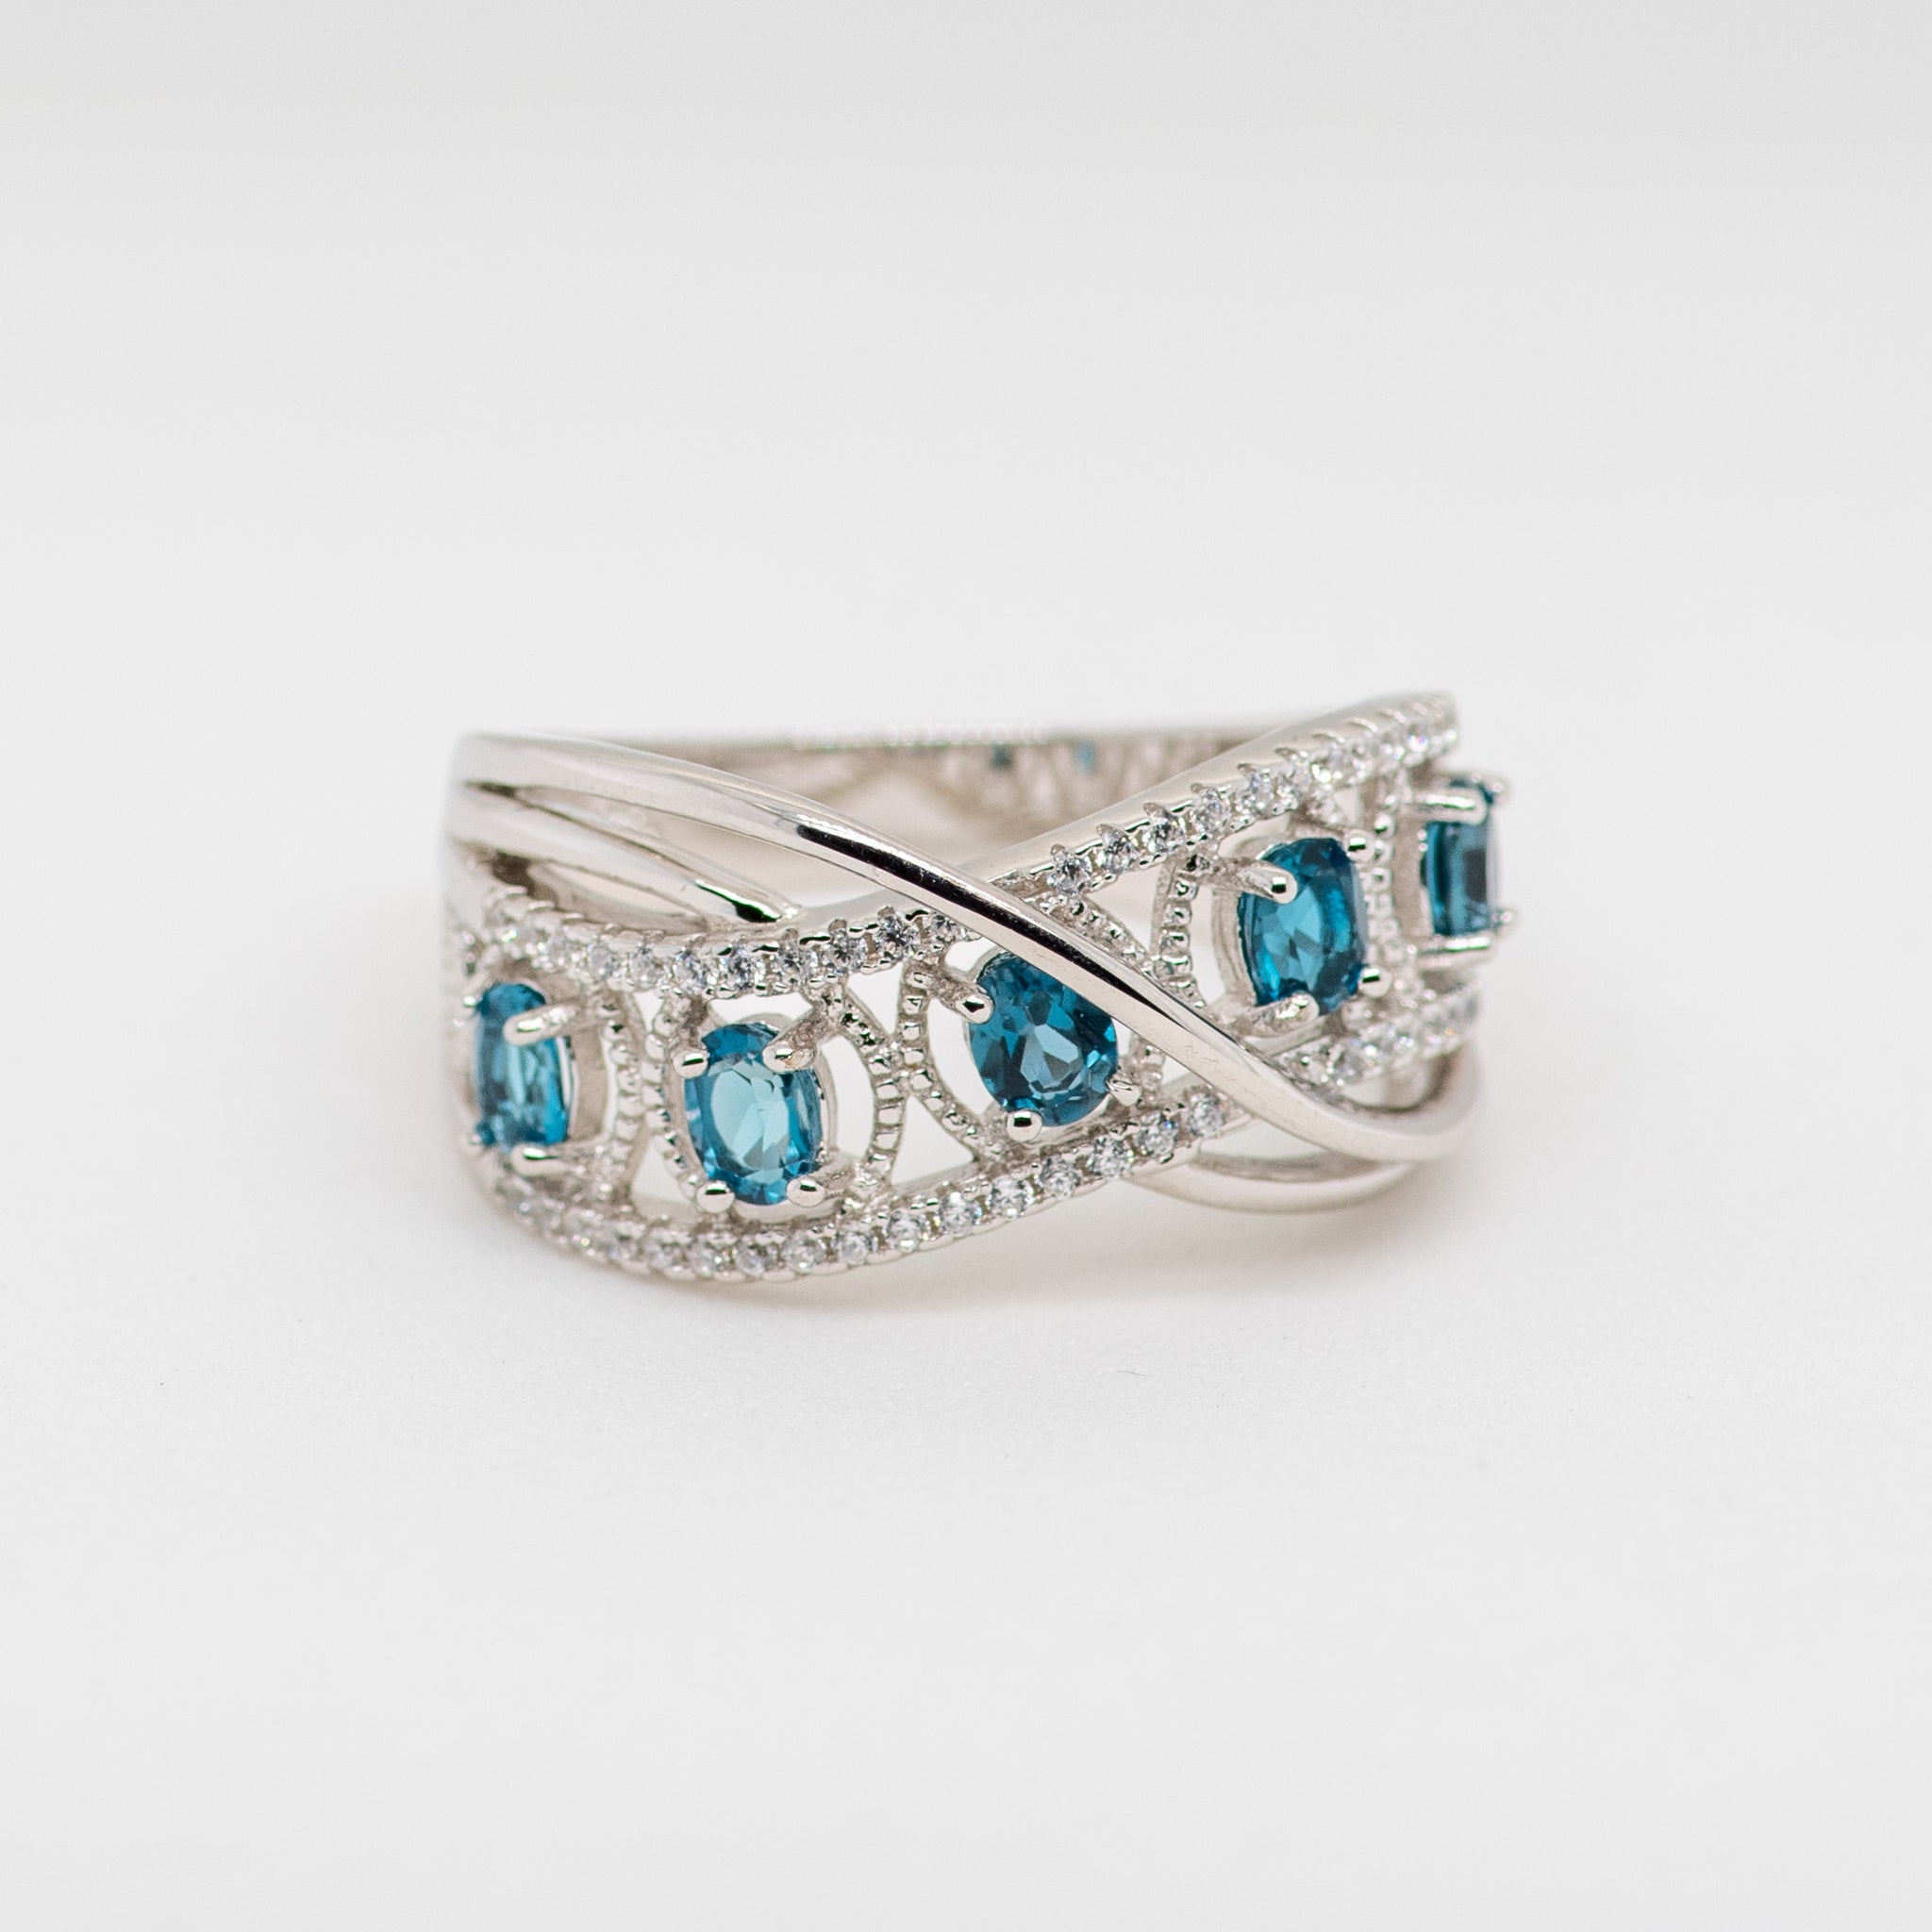 Parity London Blue Topaz Ring in Sterling Silver - Heron and Swan